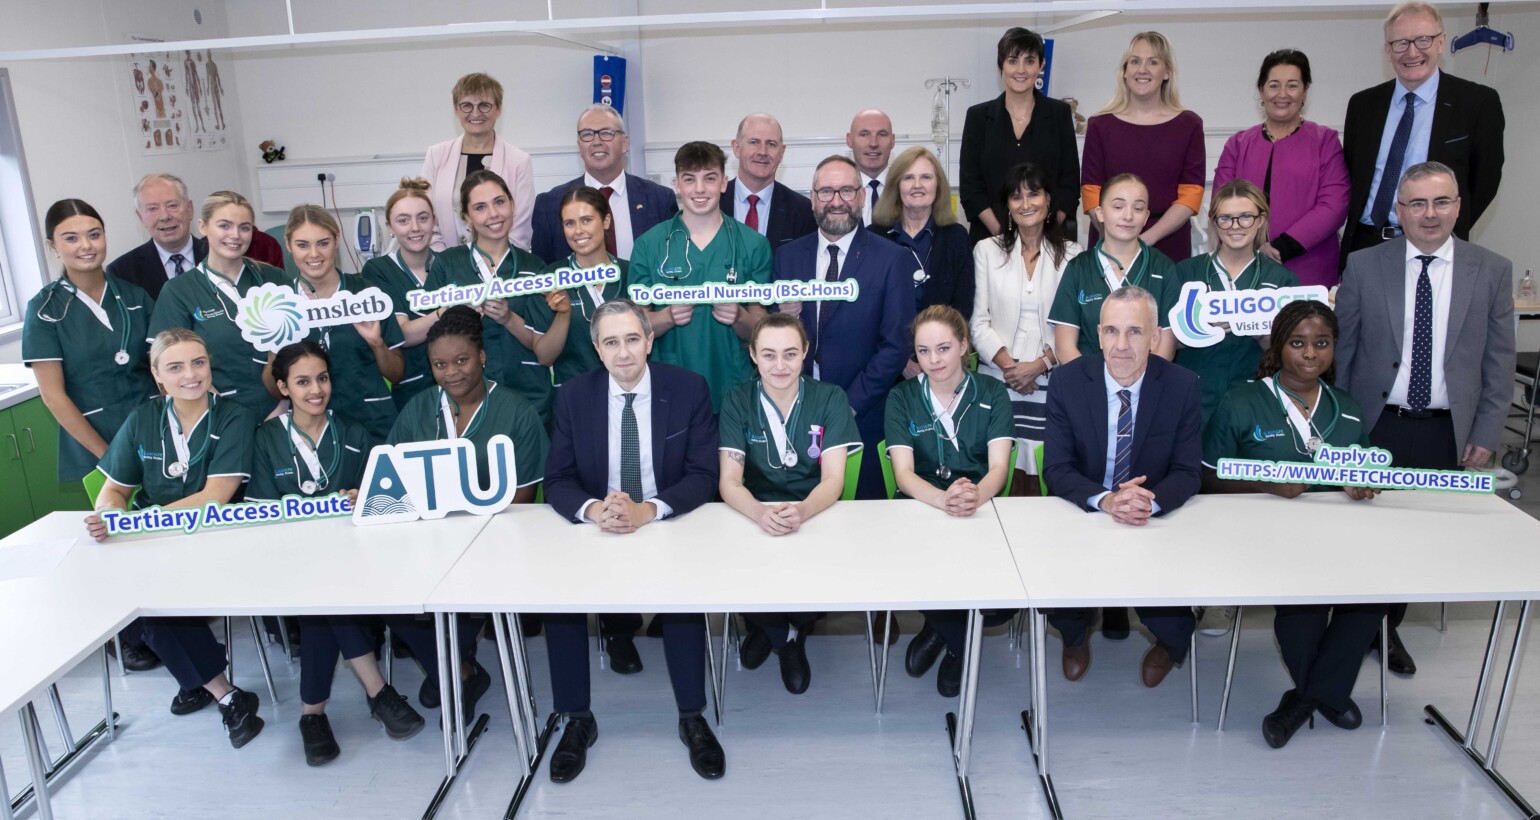 Minister Simon Harris Visits Sligo College of Further Education to Meet the First Class of Nursing Tertiary Degree Students